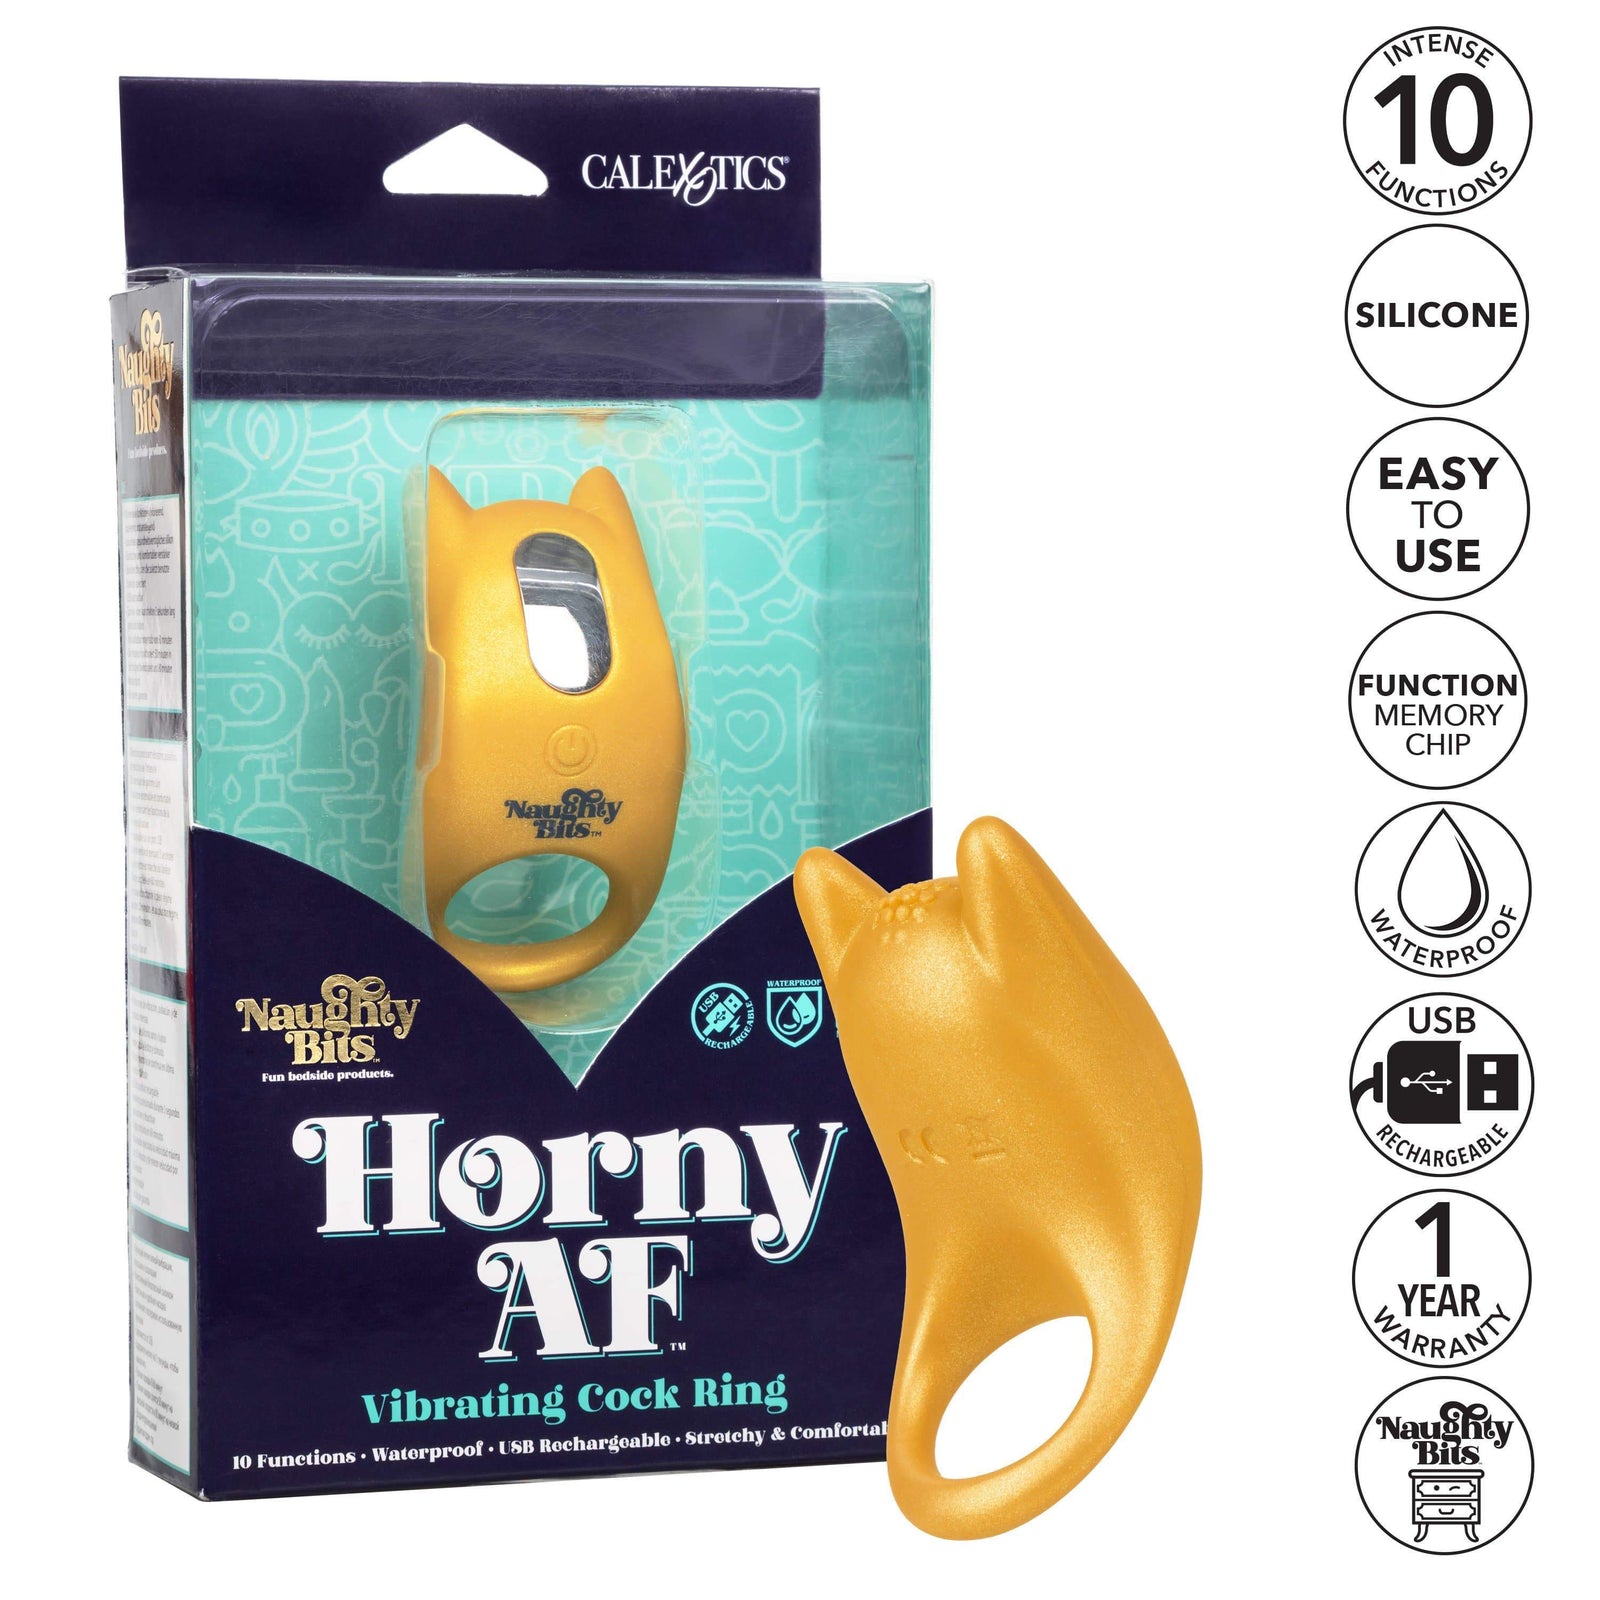 California Exotics - Naughty Bits Horny AF Vibrating Cock Ring (Yellow) Silicone Cock Ring (Vibration) Rechargeable Durio Asia